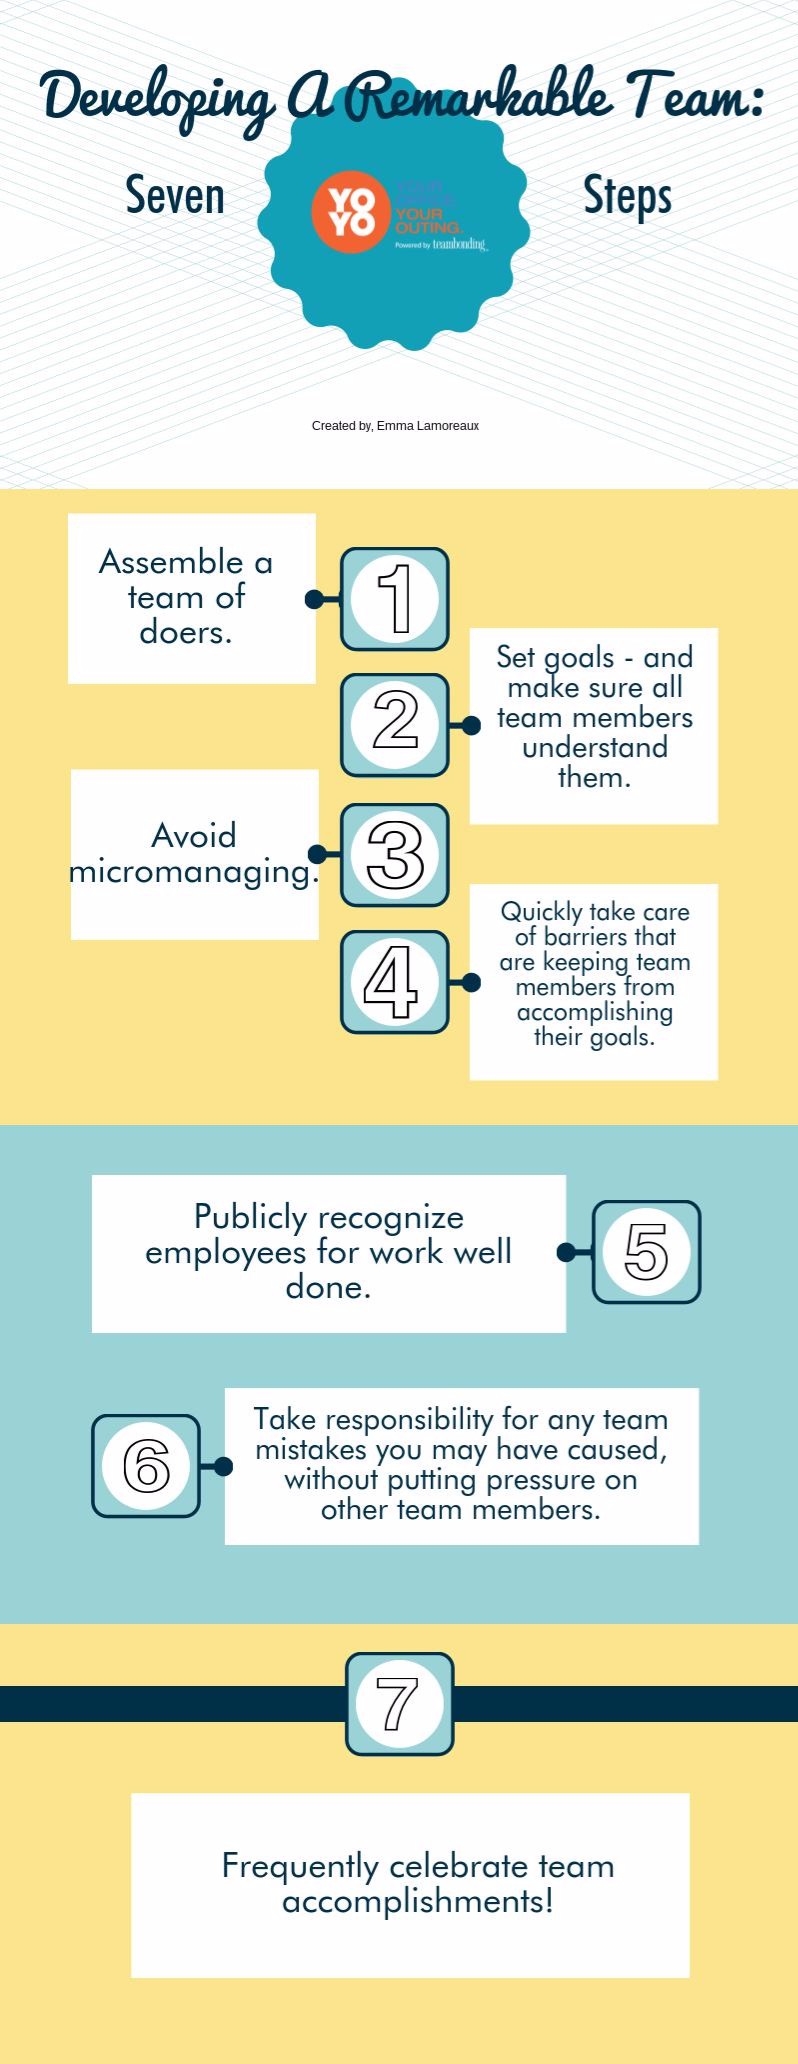 7 Steps to Developing a Remarkable Team 